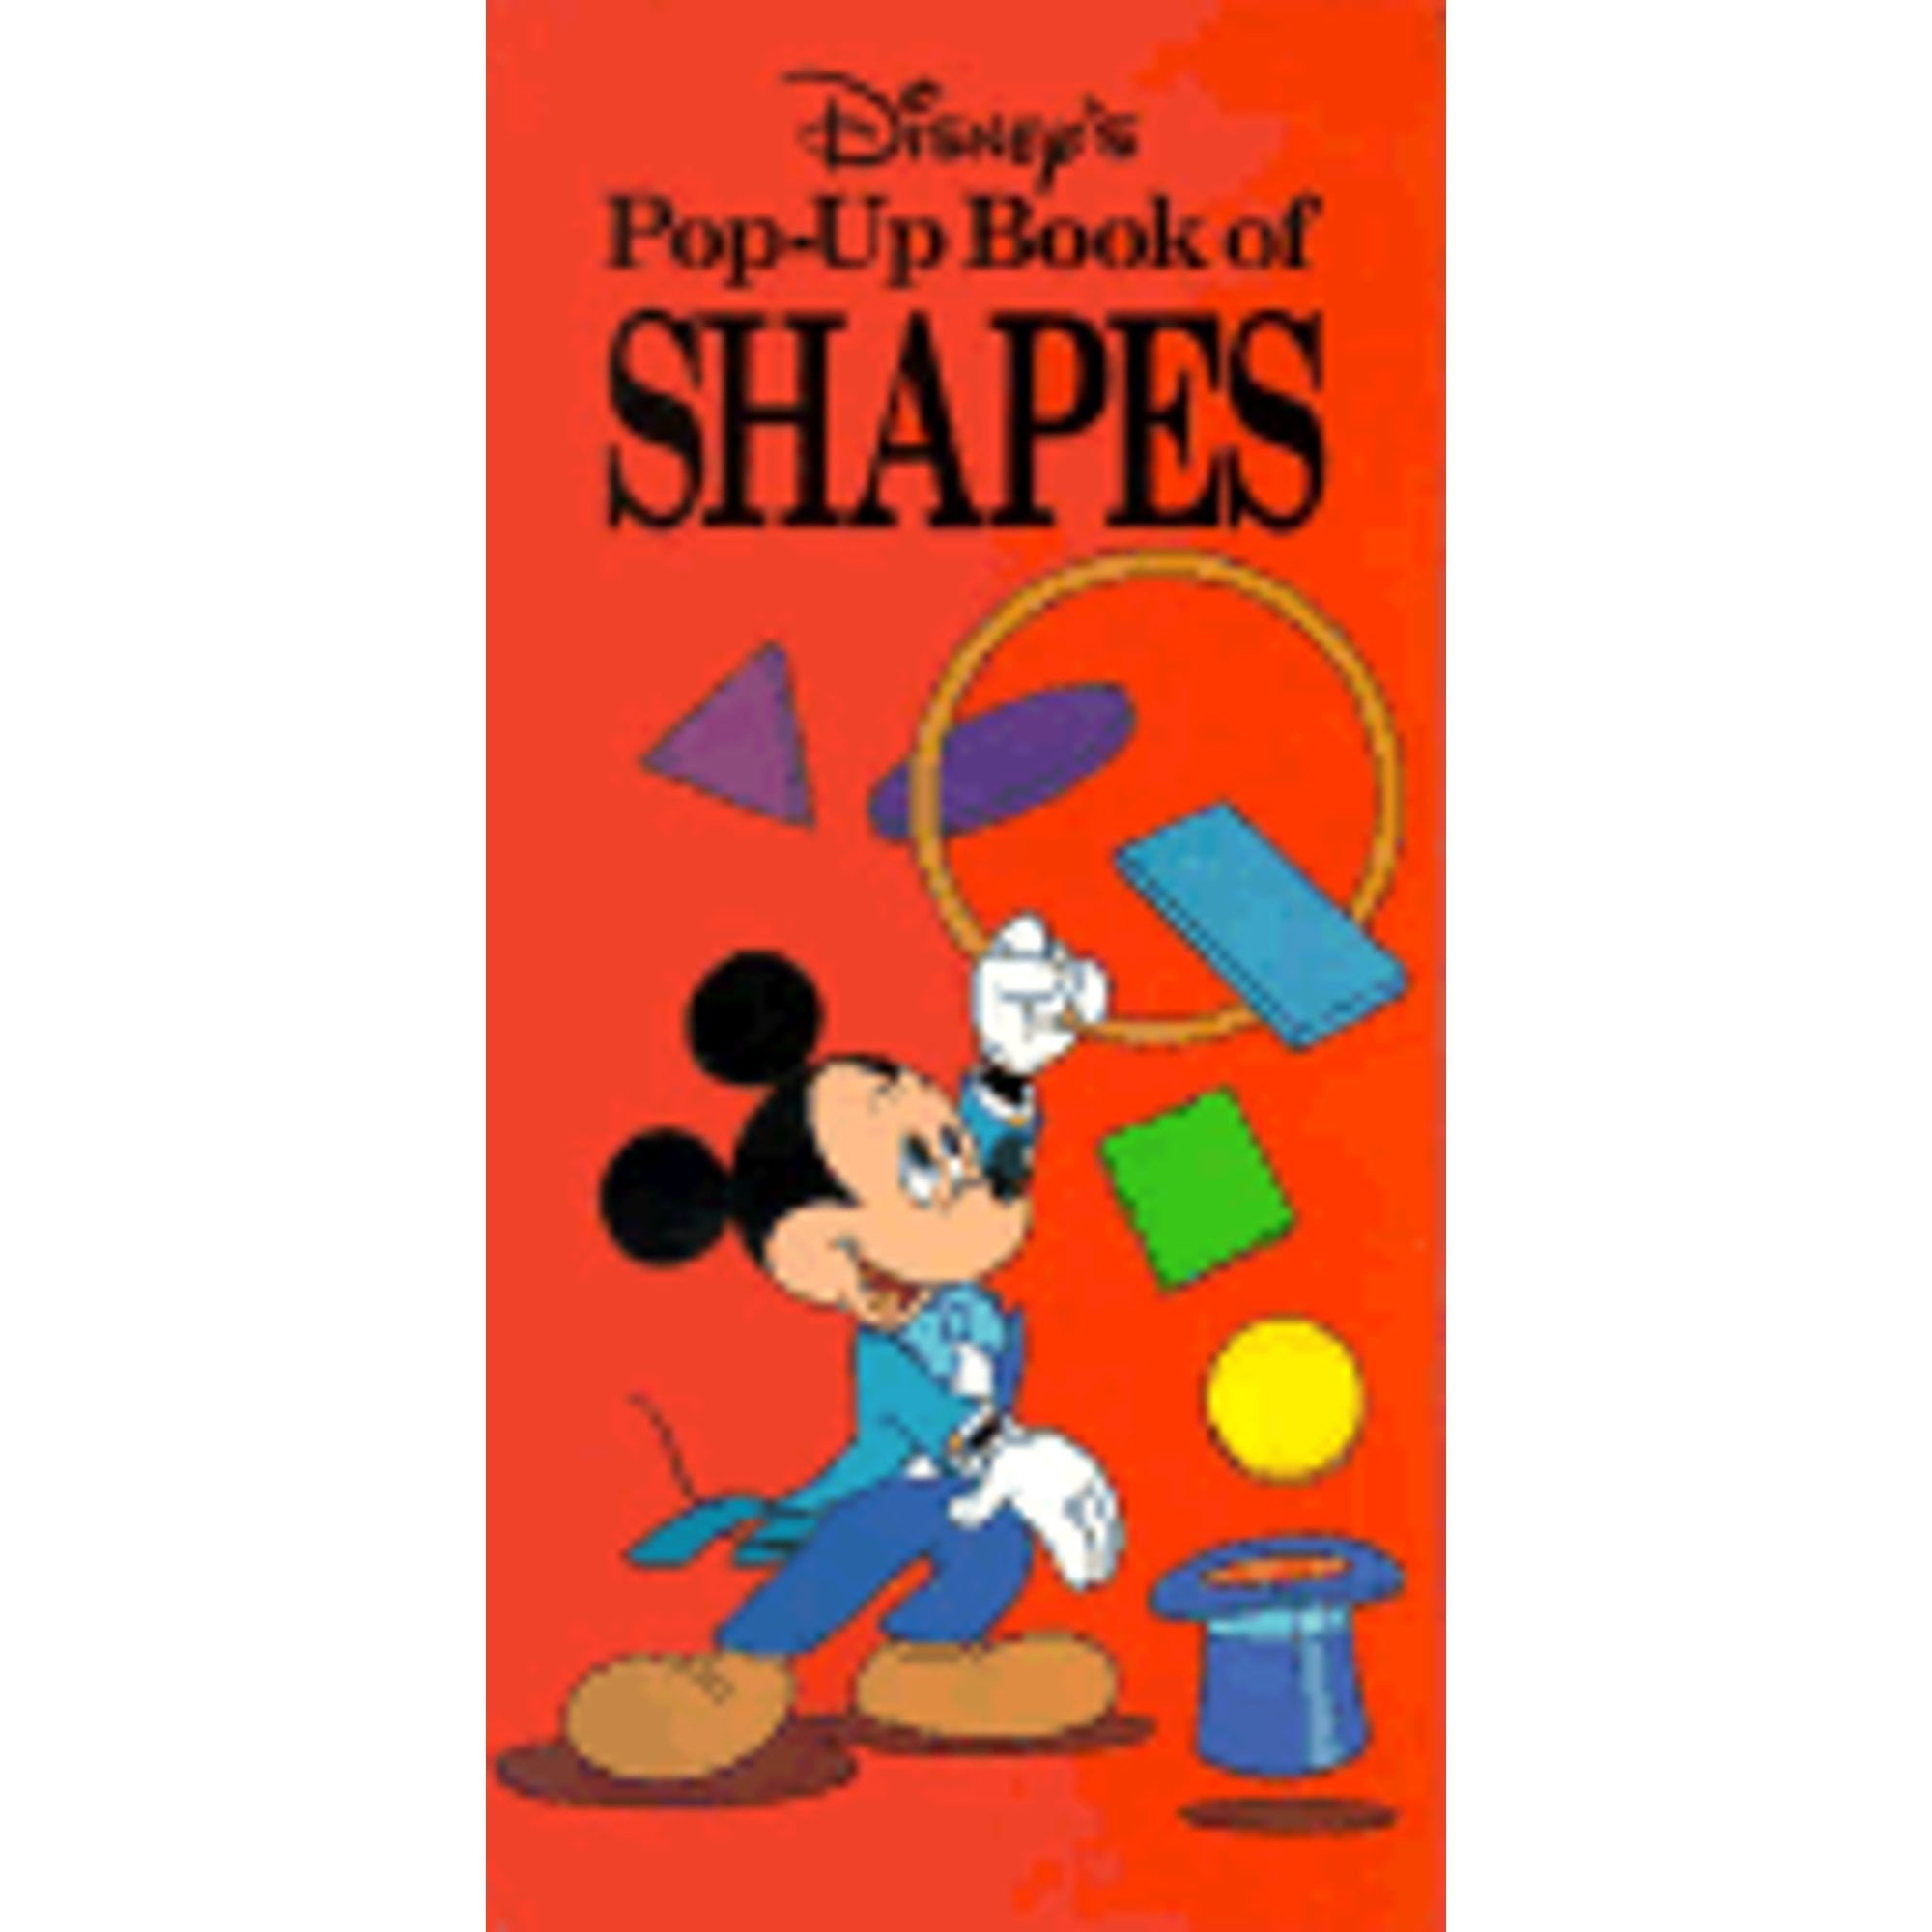 Pre-Owned Disney's Pop-Up Book of Shapes (Hardcover) by Walt Disney Productions